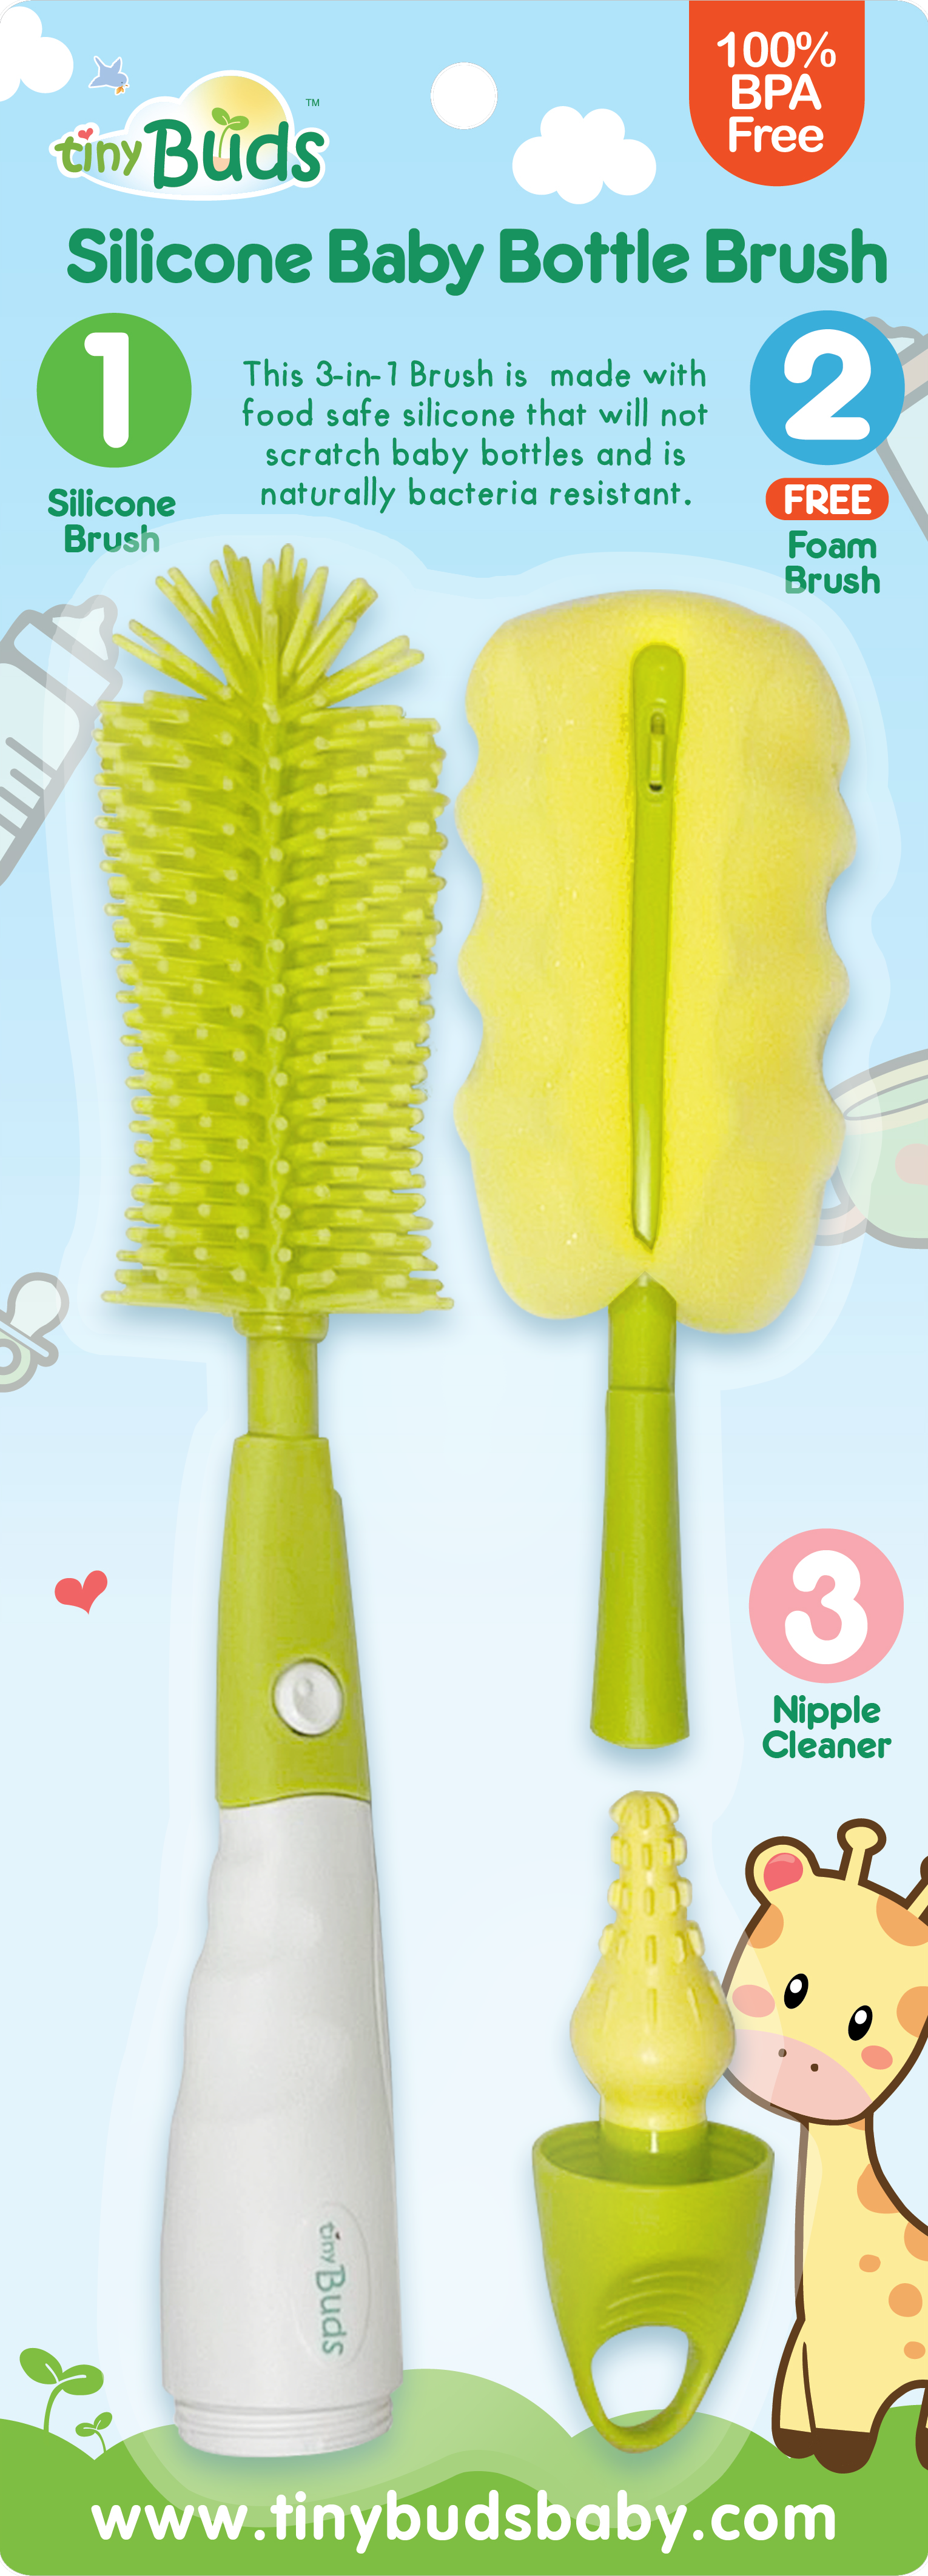 Tiny Buds Silicone Baby Bottle Brush Color Green